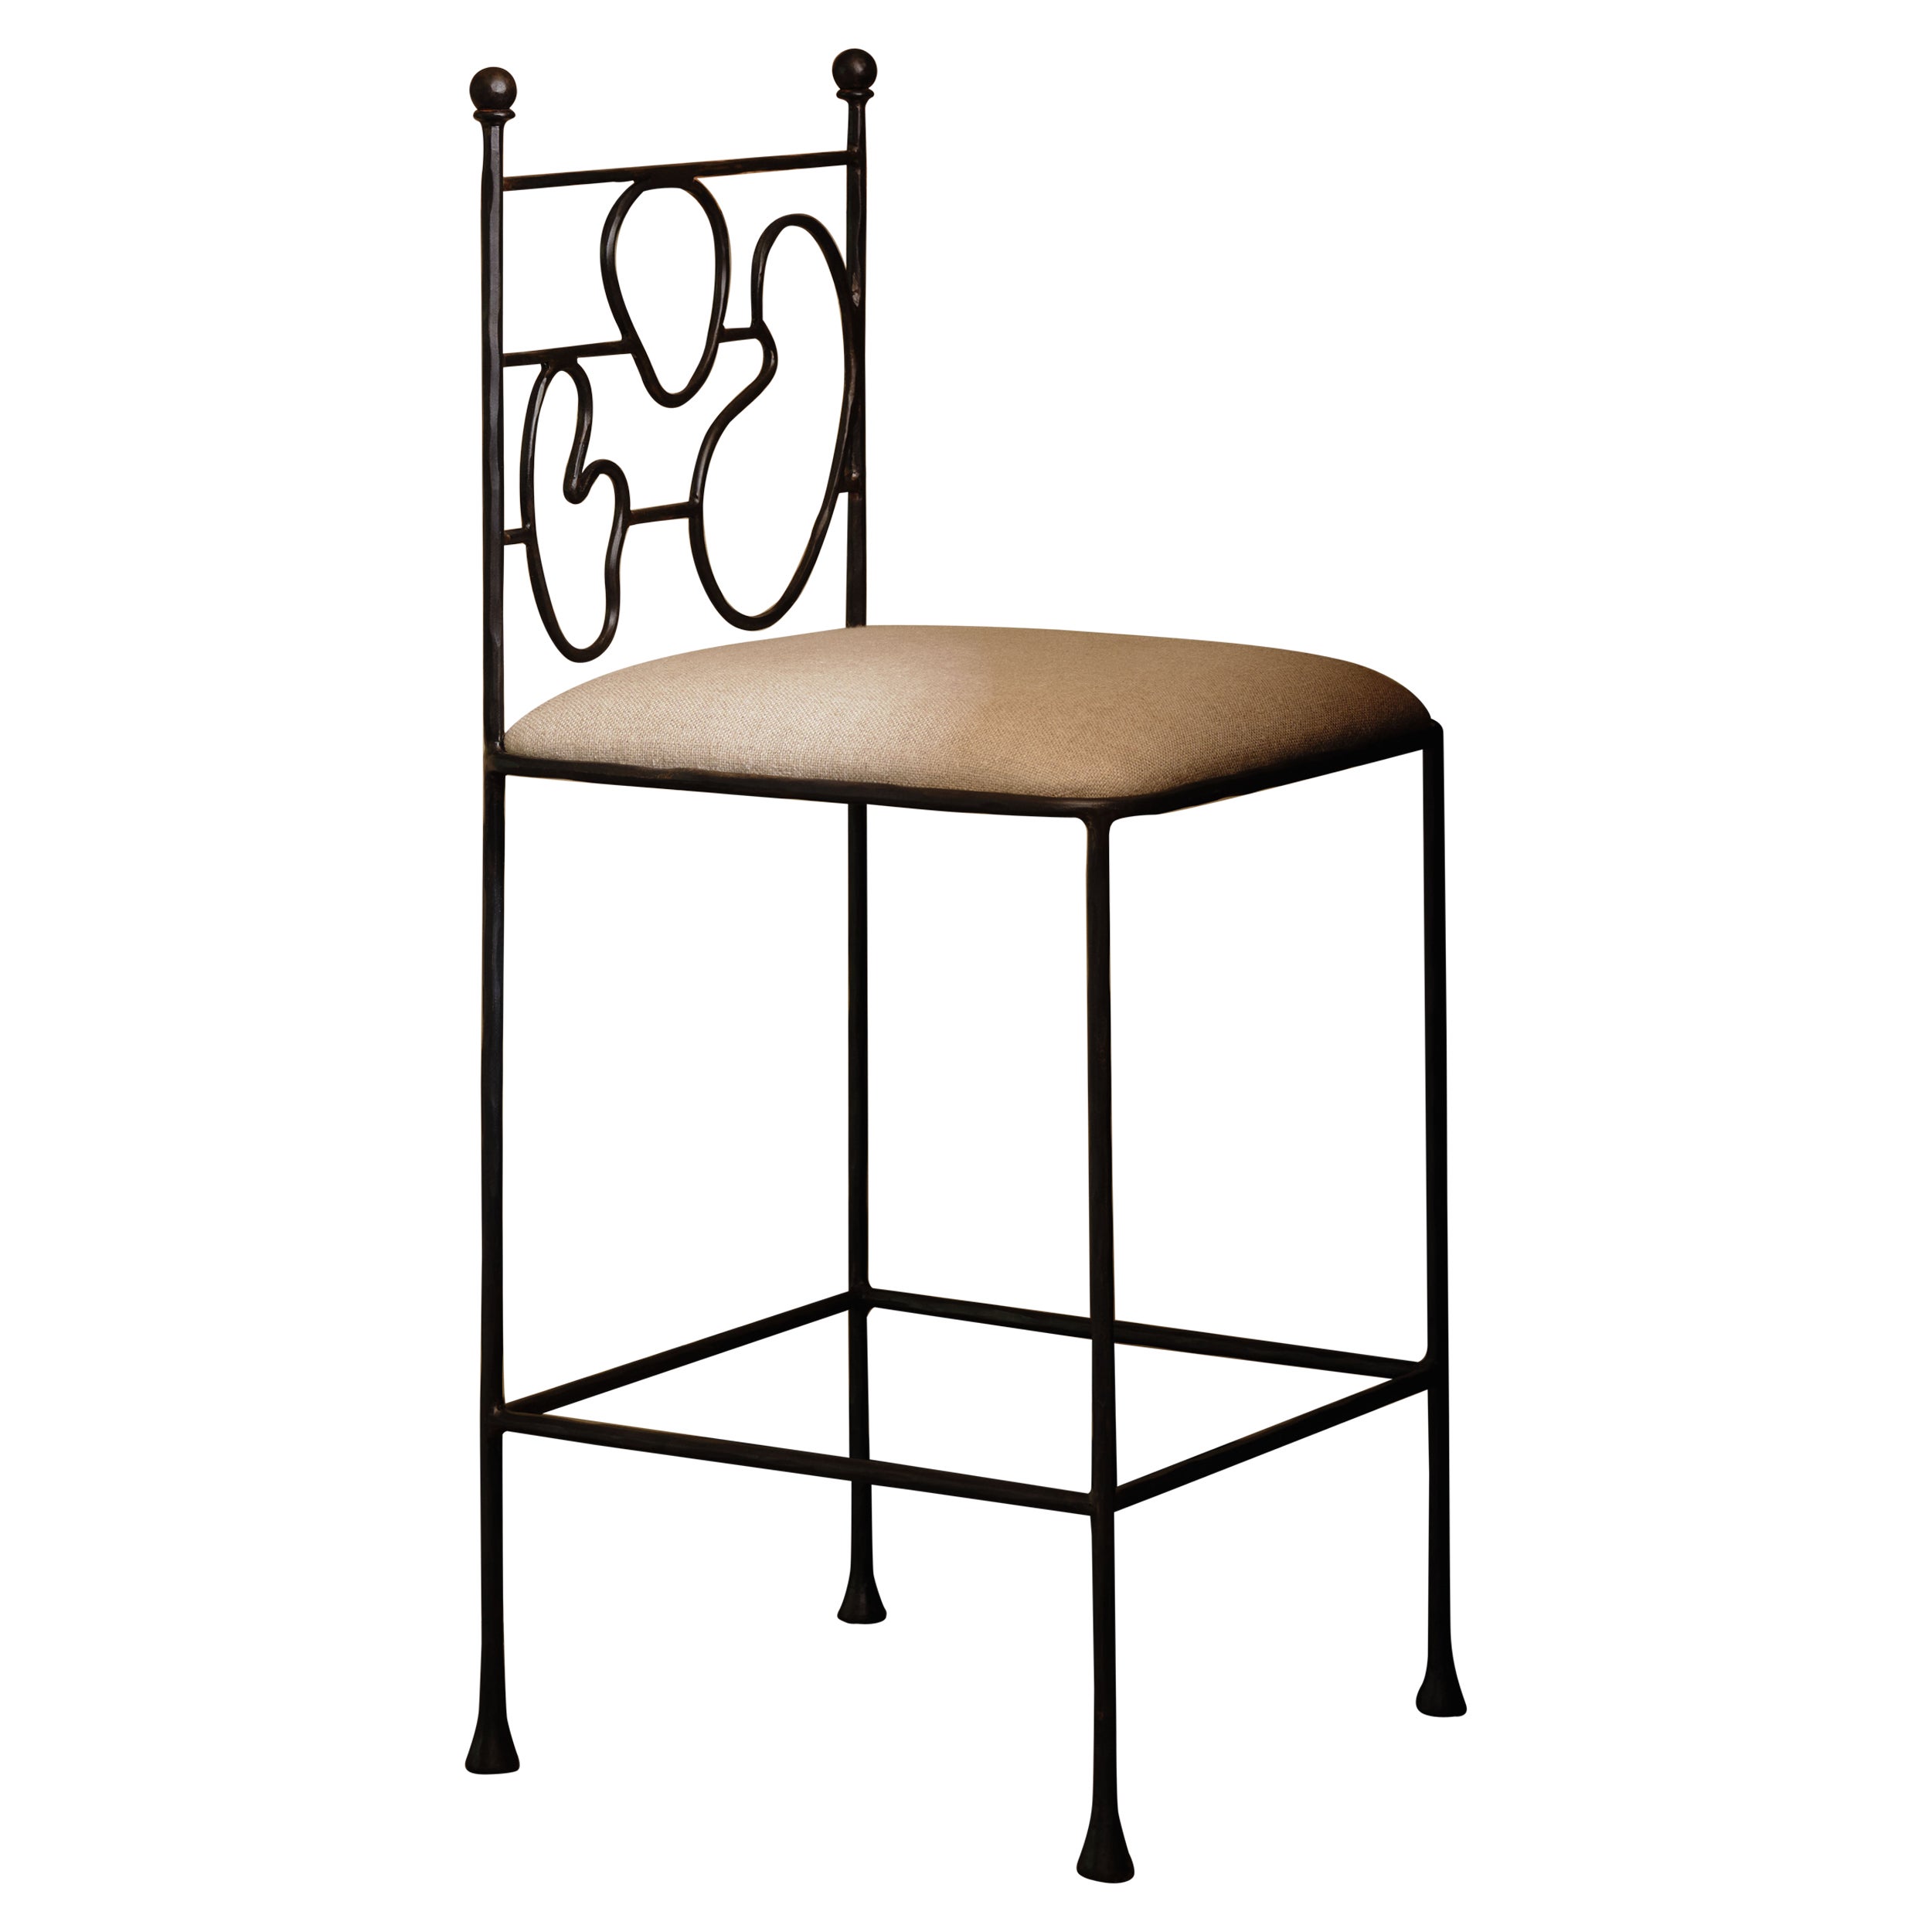 Anna Karlin Wrought Iron Counter Stool, B For Sale